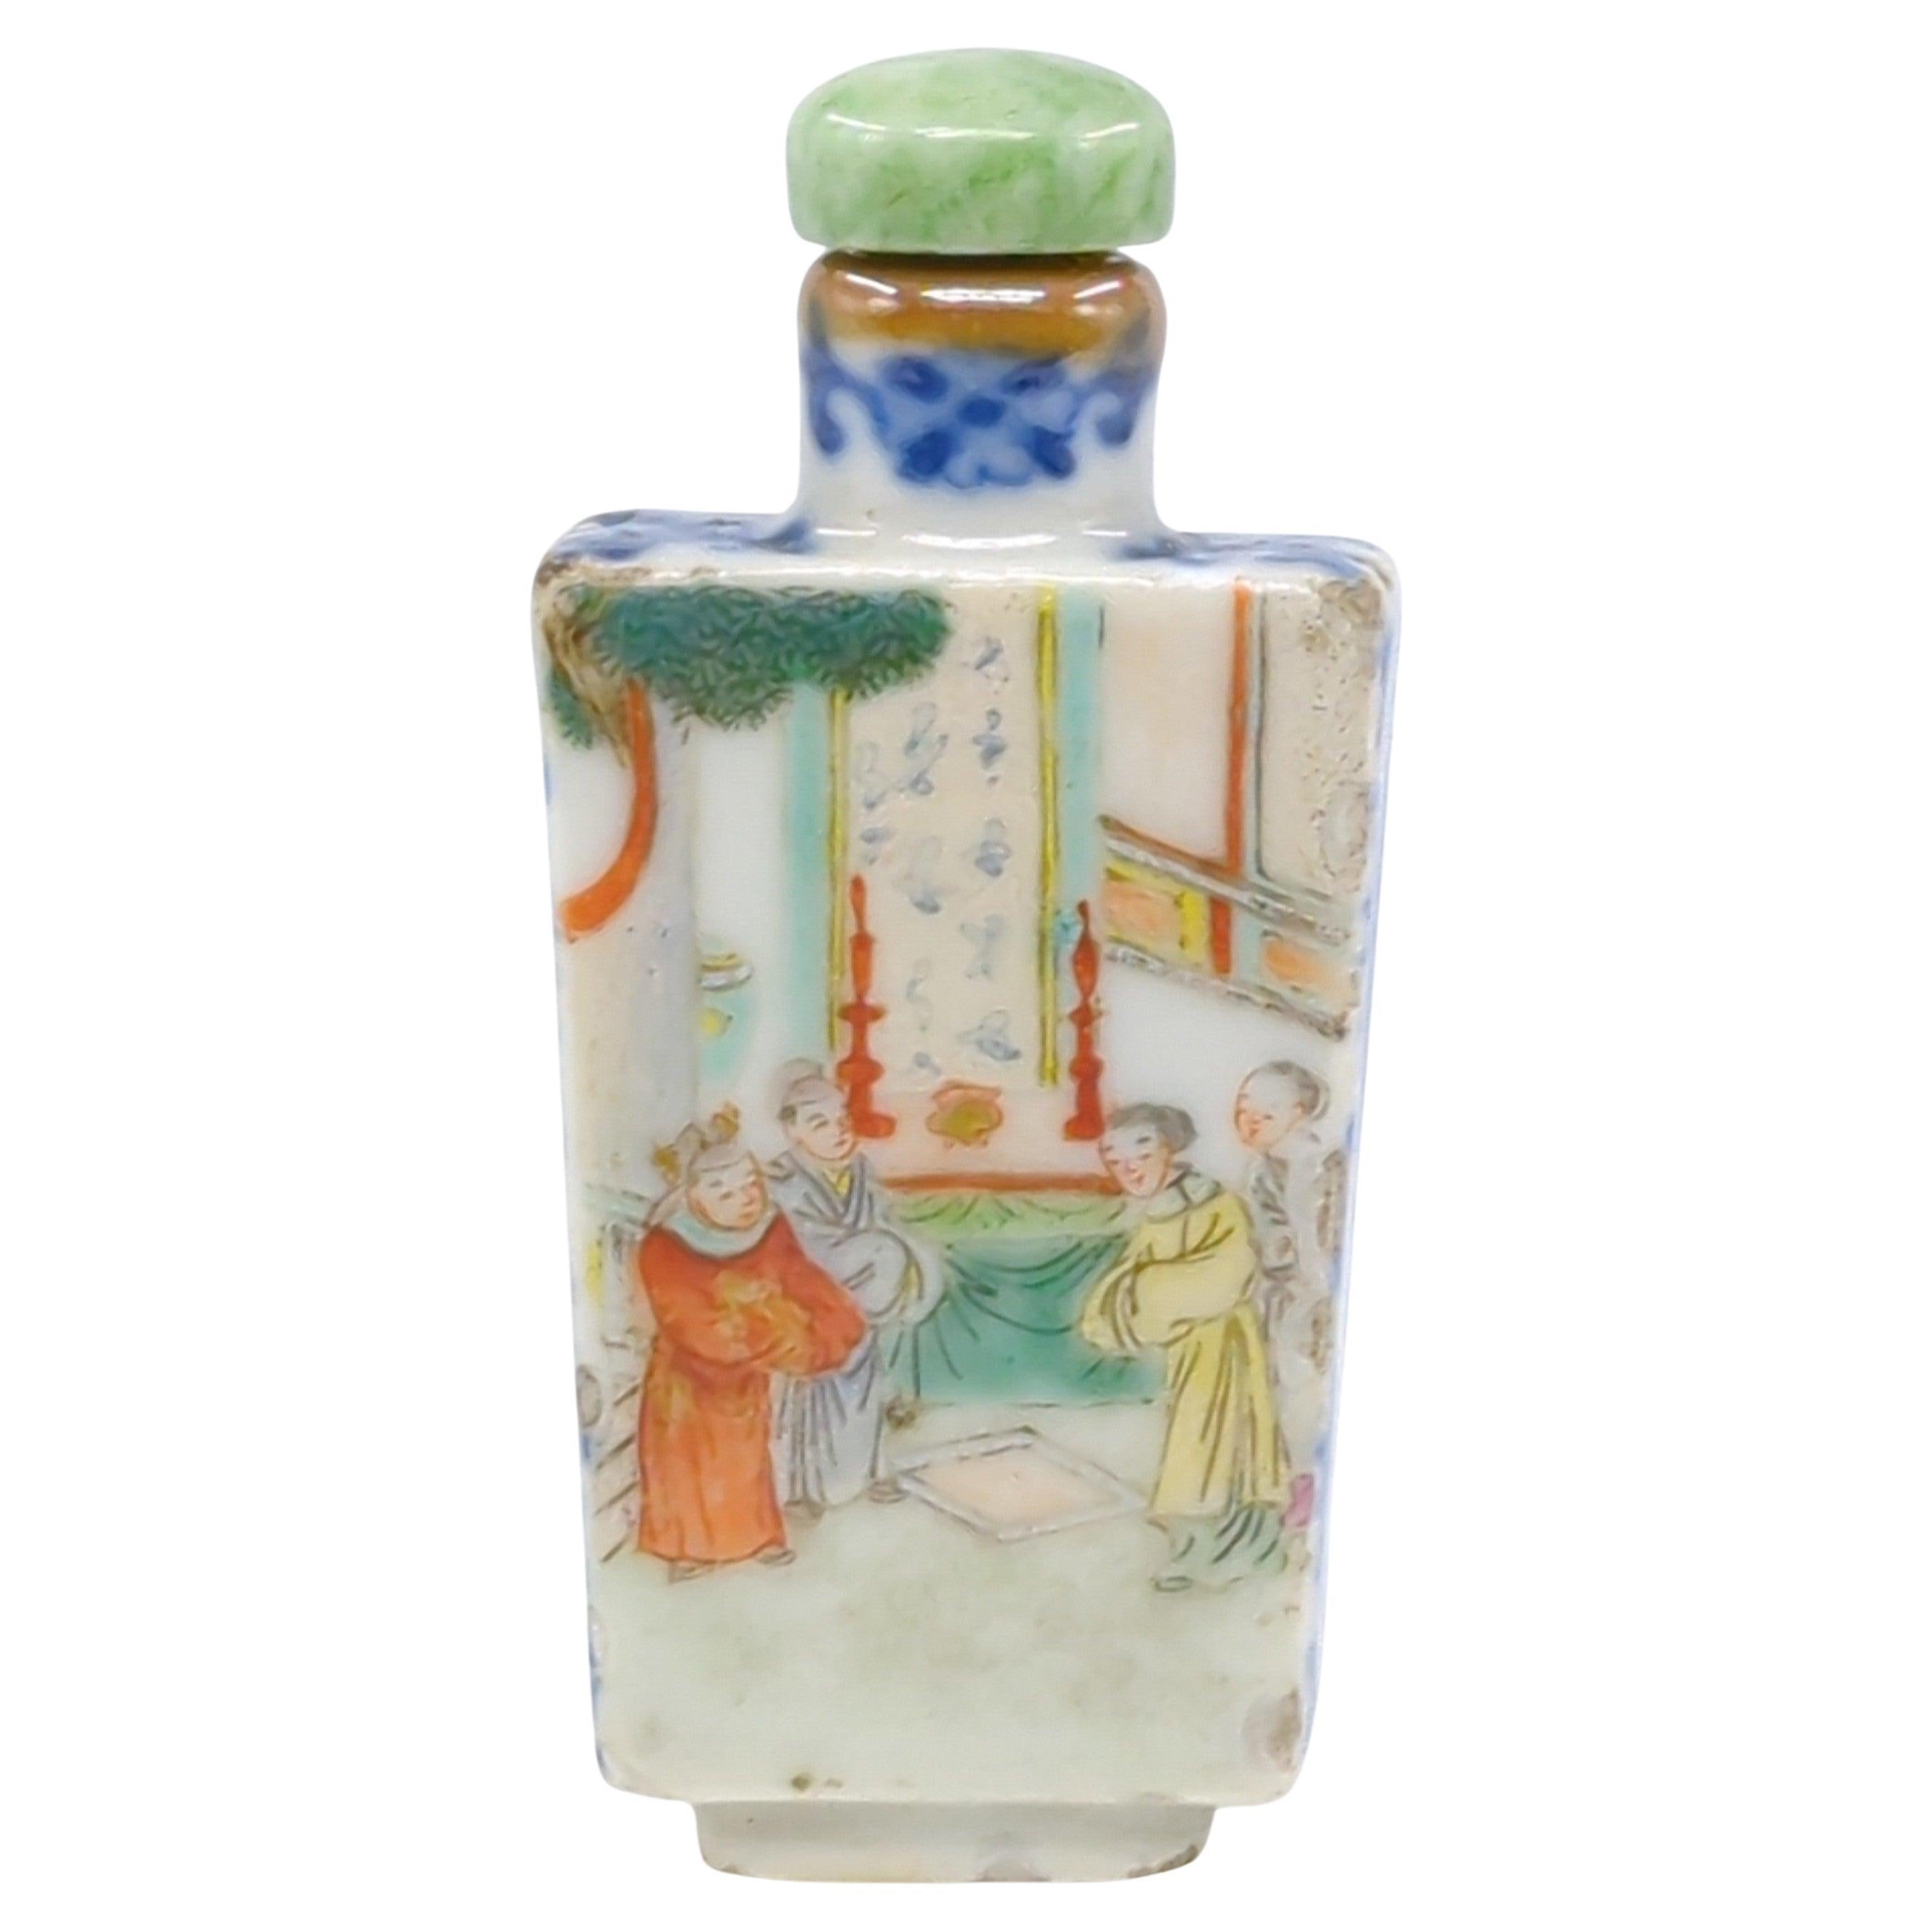 Bouteille de parfum famille rose ancienne porcelaine chinoise pagode Qing Jiaqing Mark 19c